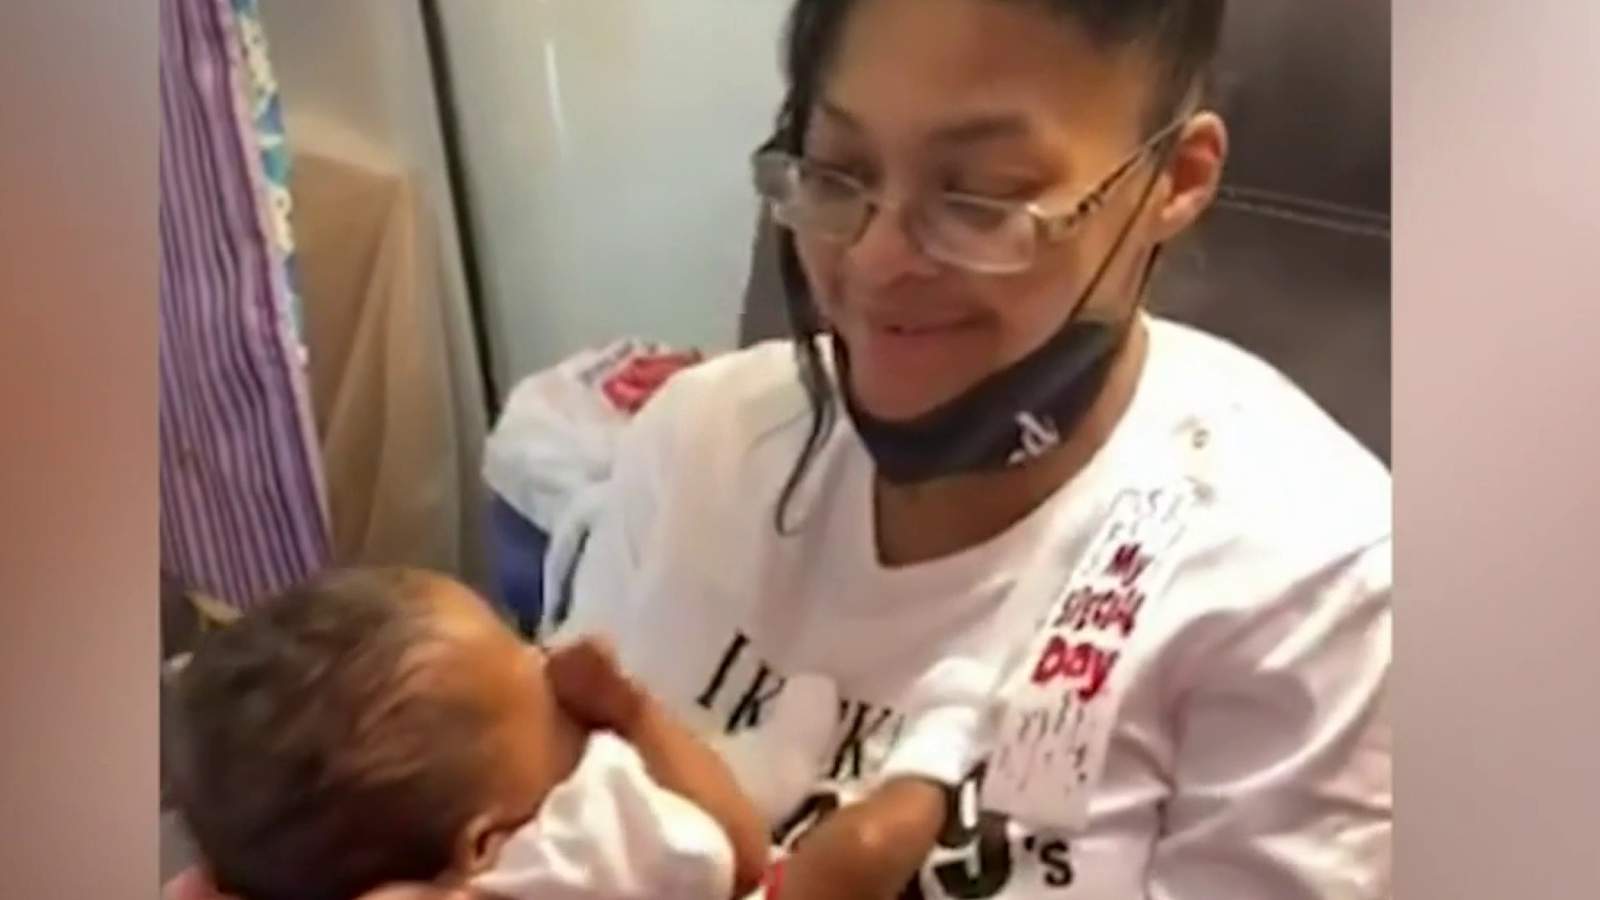 Detroit mother spends 33 days on ventilator right after emergency birth due to COVID-19